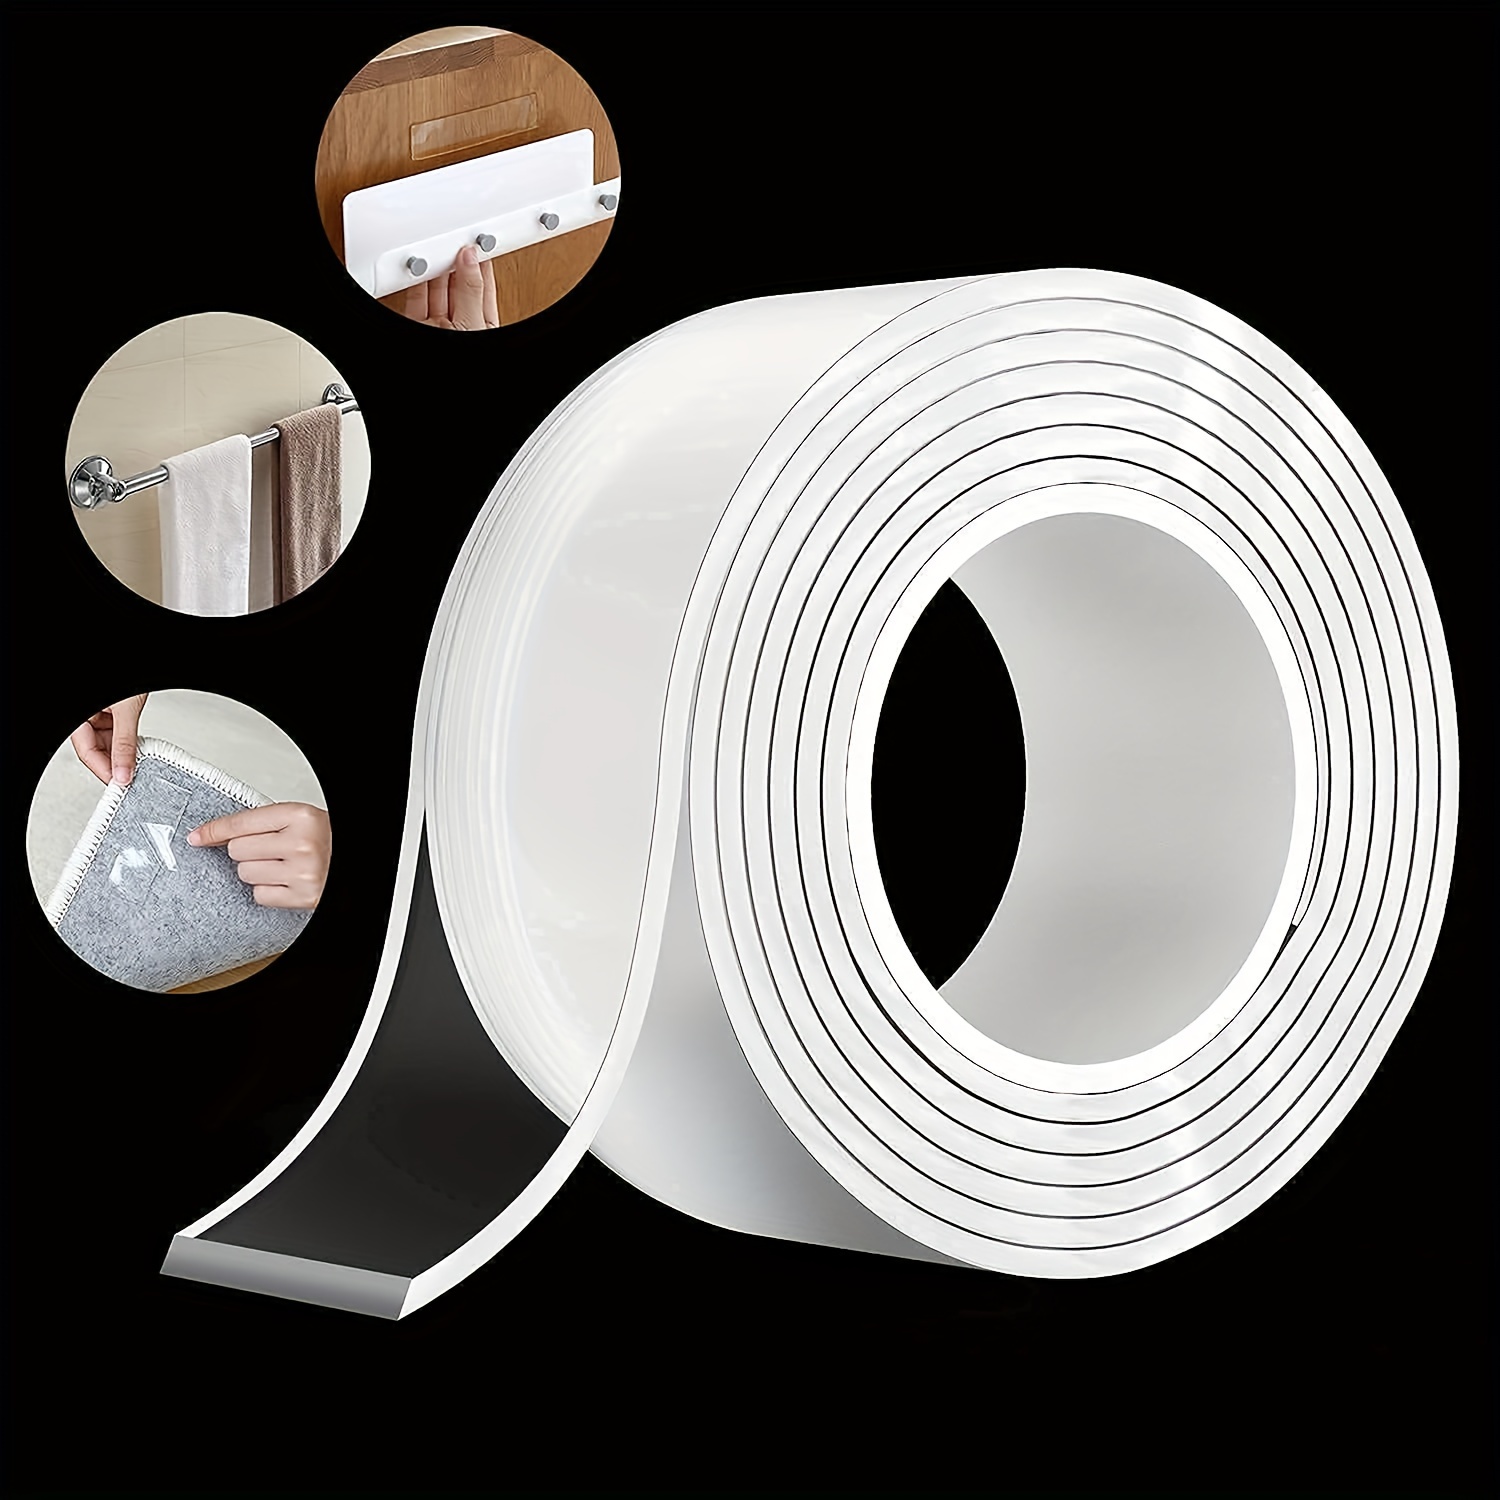 1 Roll Of Heavy Duty, Non-Trace, Waterproof Nano Double Sided Tape - The  Ultimate Mounting Solution!